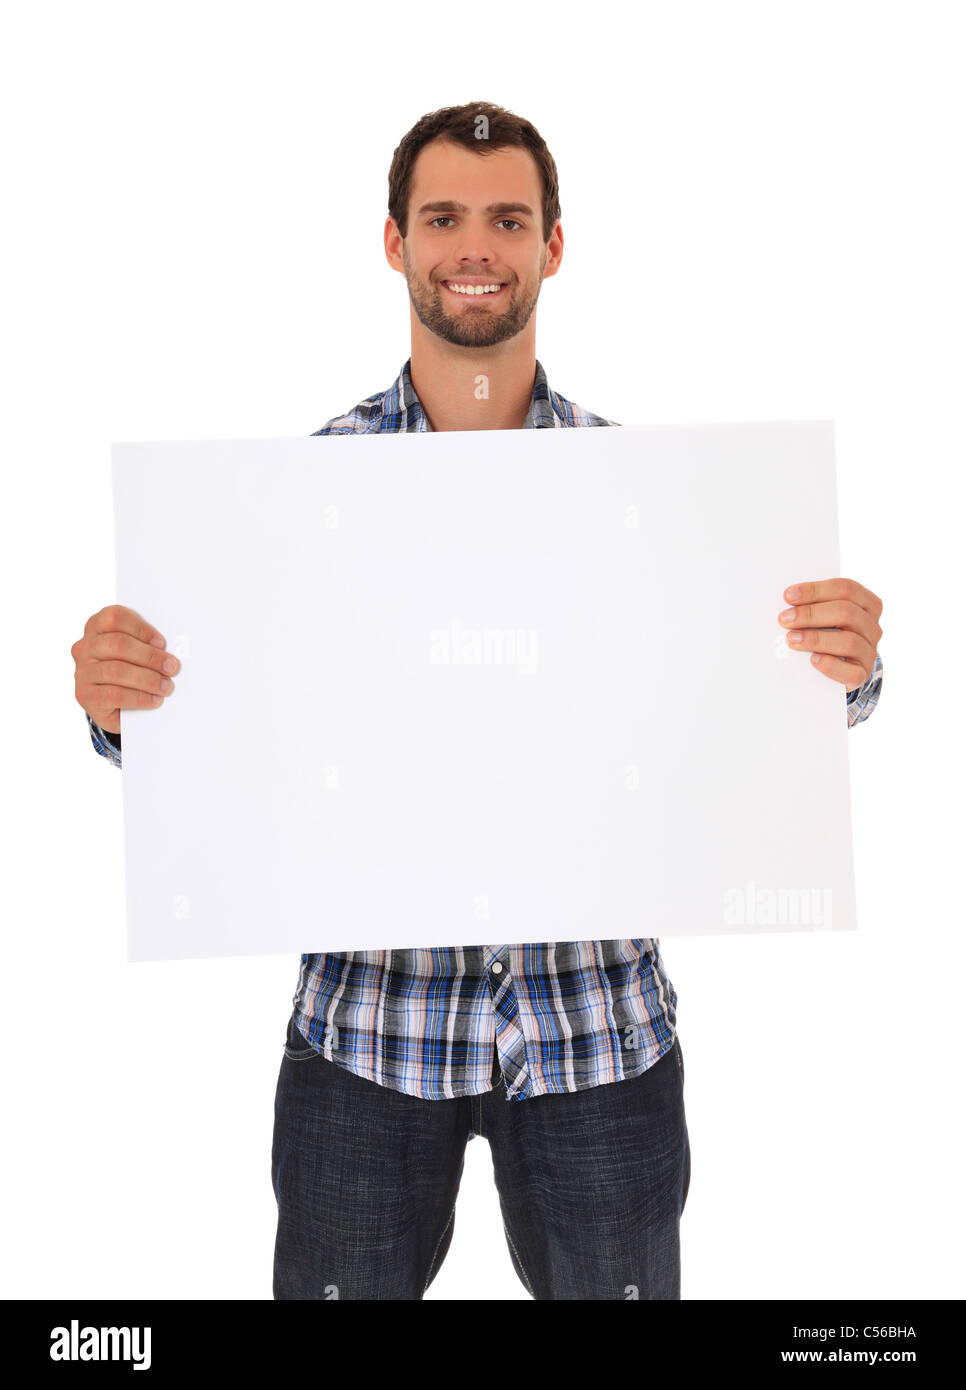 Young man holding blank sign. All on white background. Stock Photo